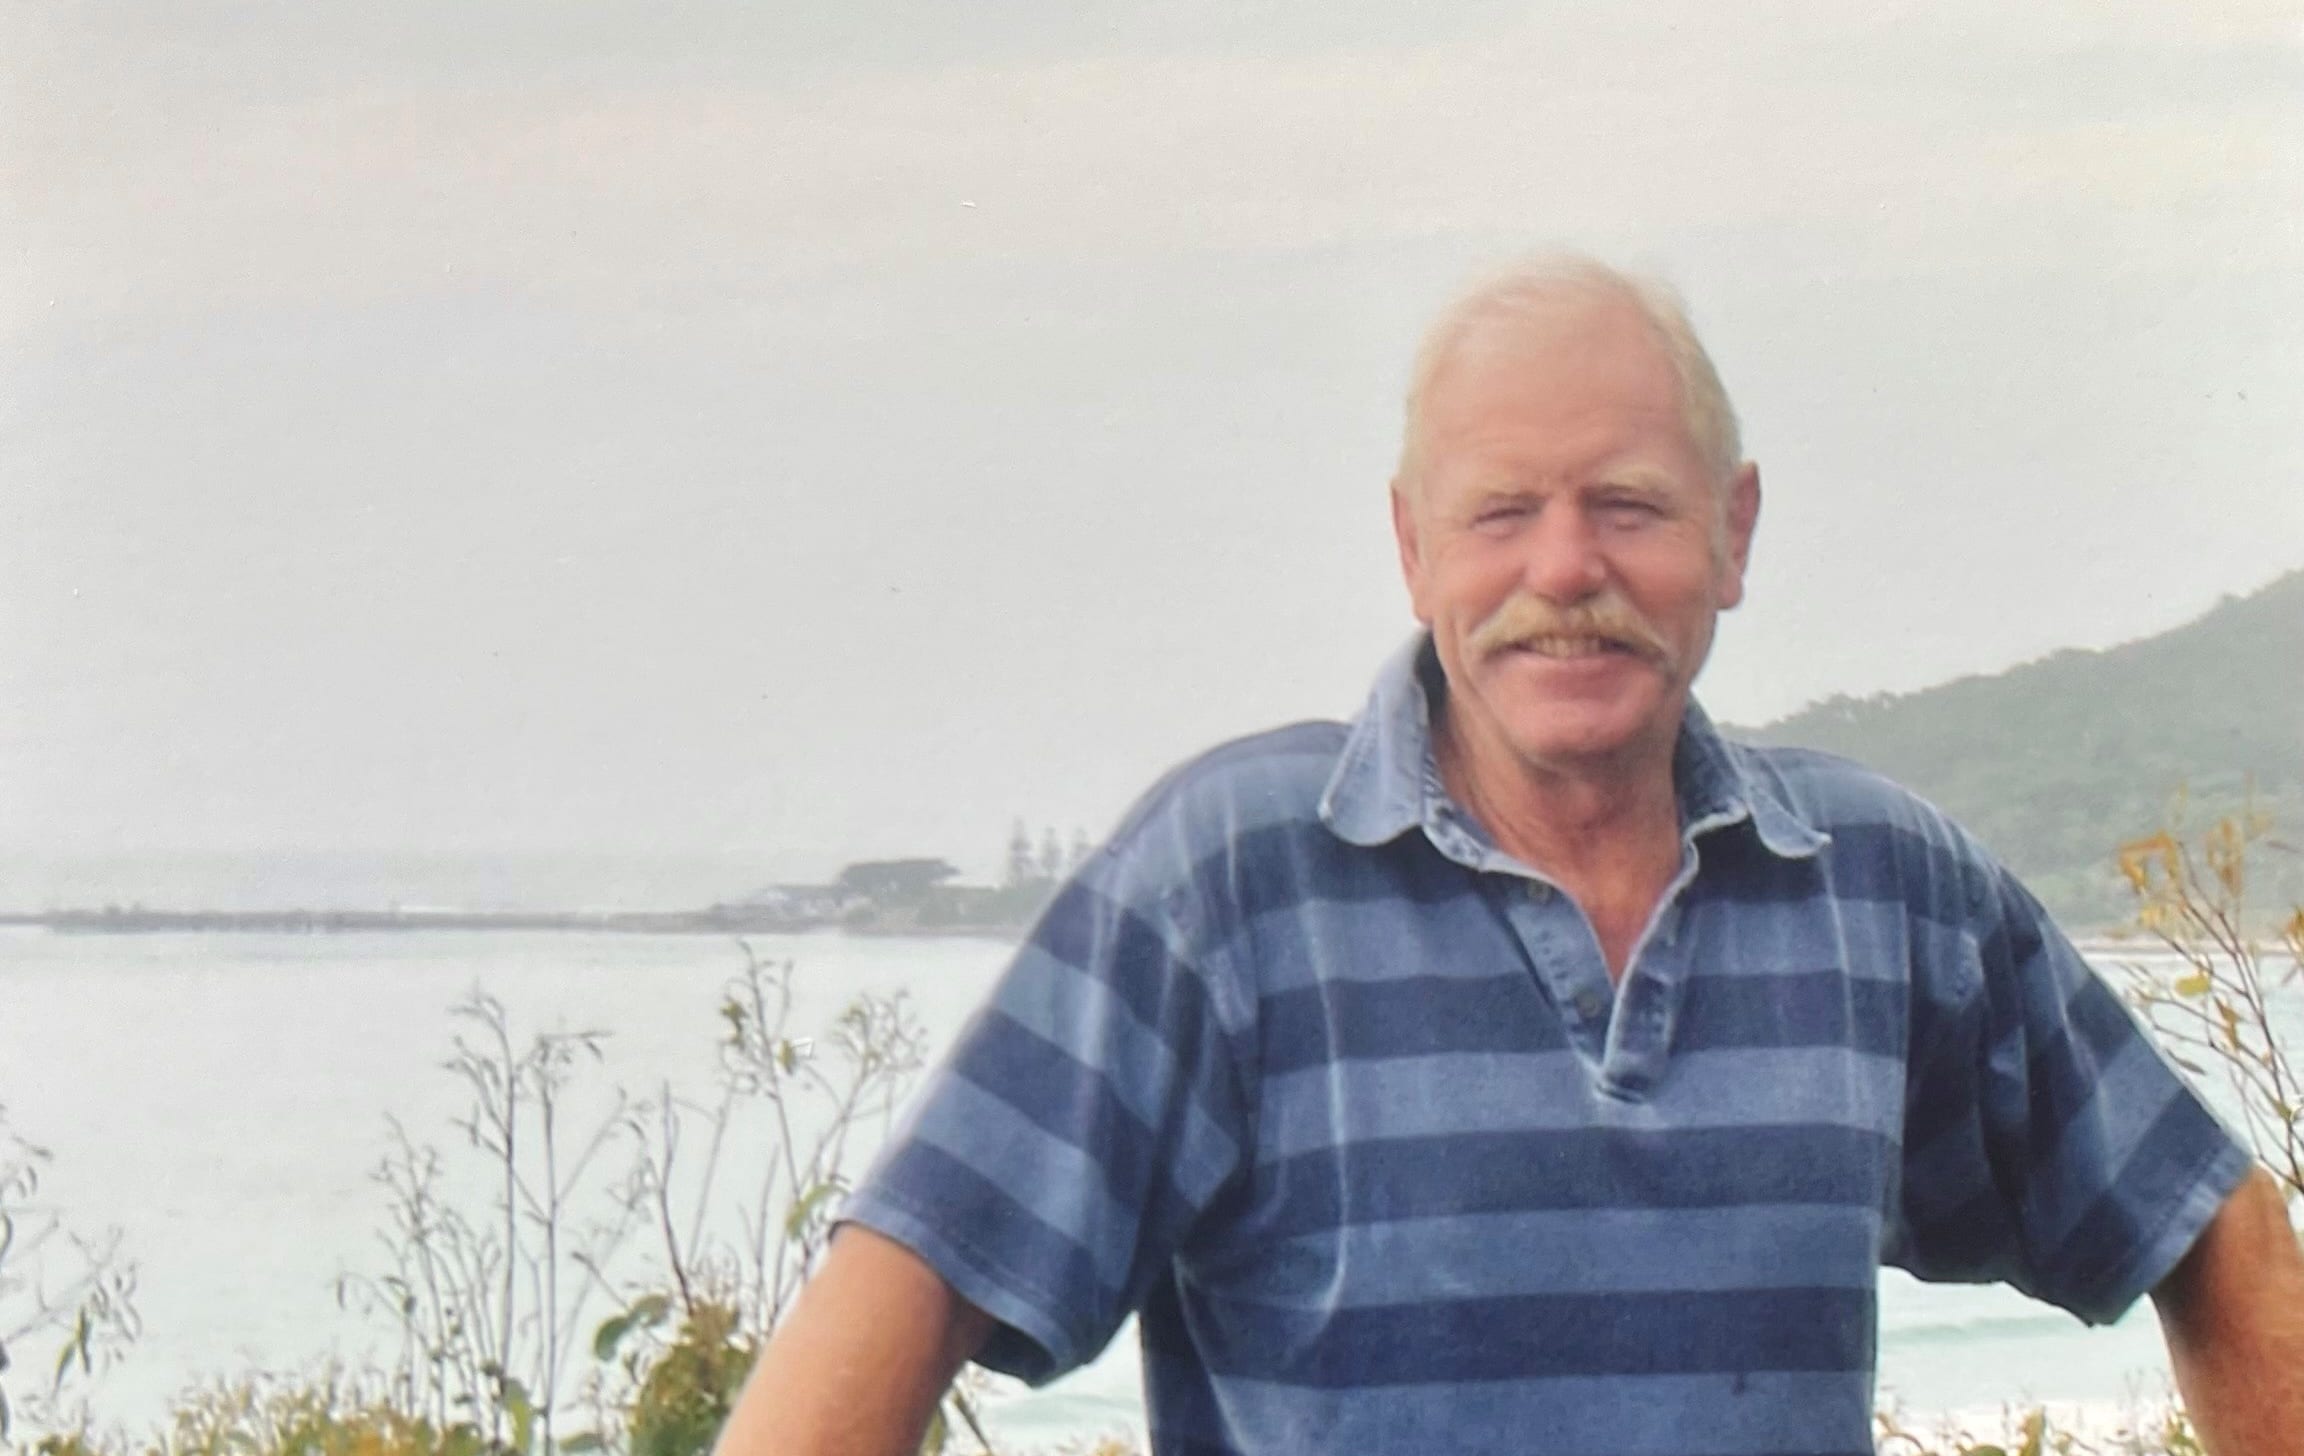 Don Grant died working at Lyttelton Port on 25 April, 2022.